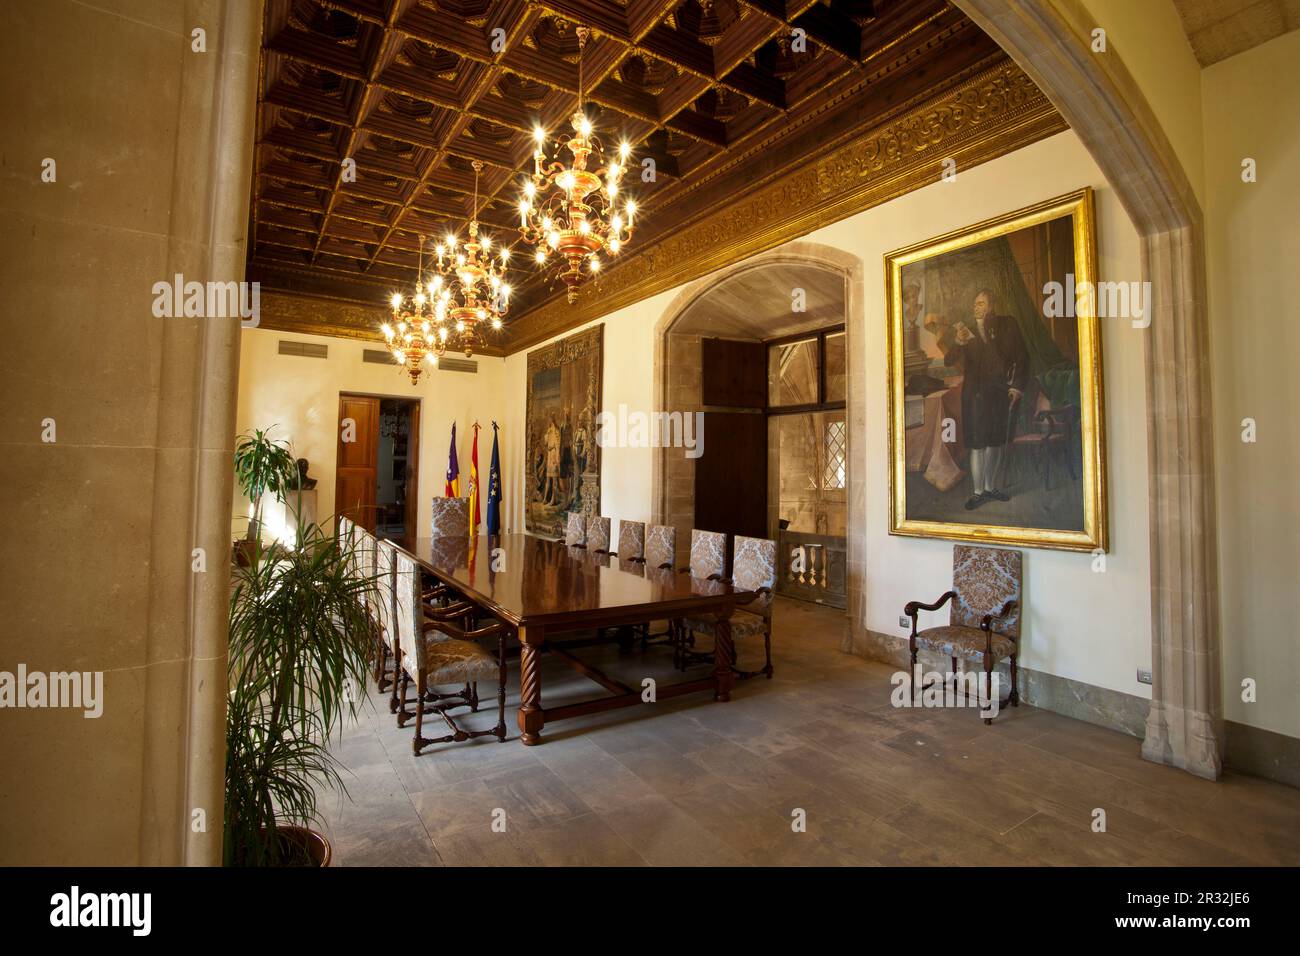 Room of the Consell de Govern.Consolat de Mar, (seat for the presidency of the Govern Balear), XVII century.Palma.Mallorca.Balearic Islands. Spain. Stock Photo